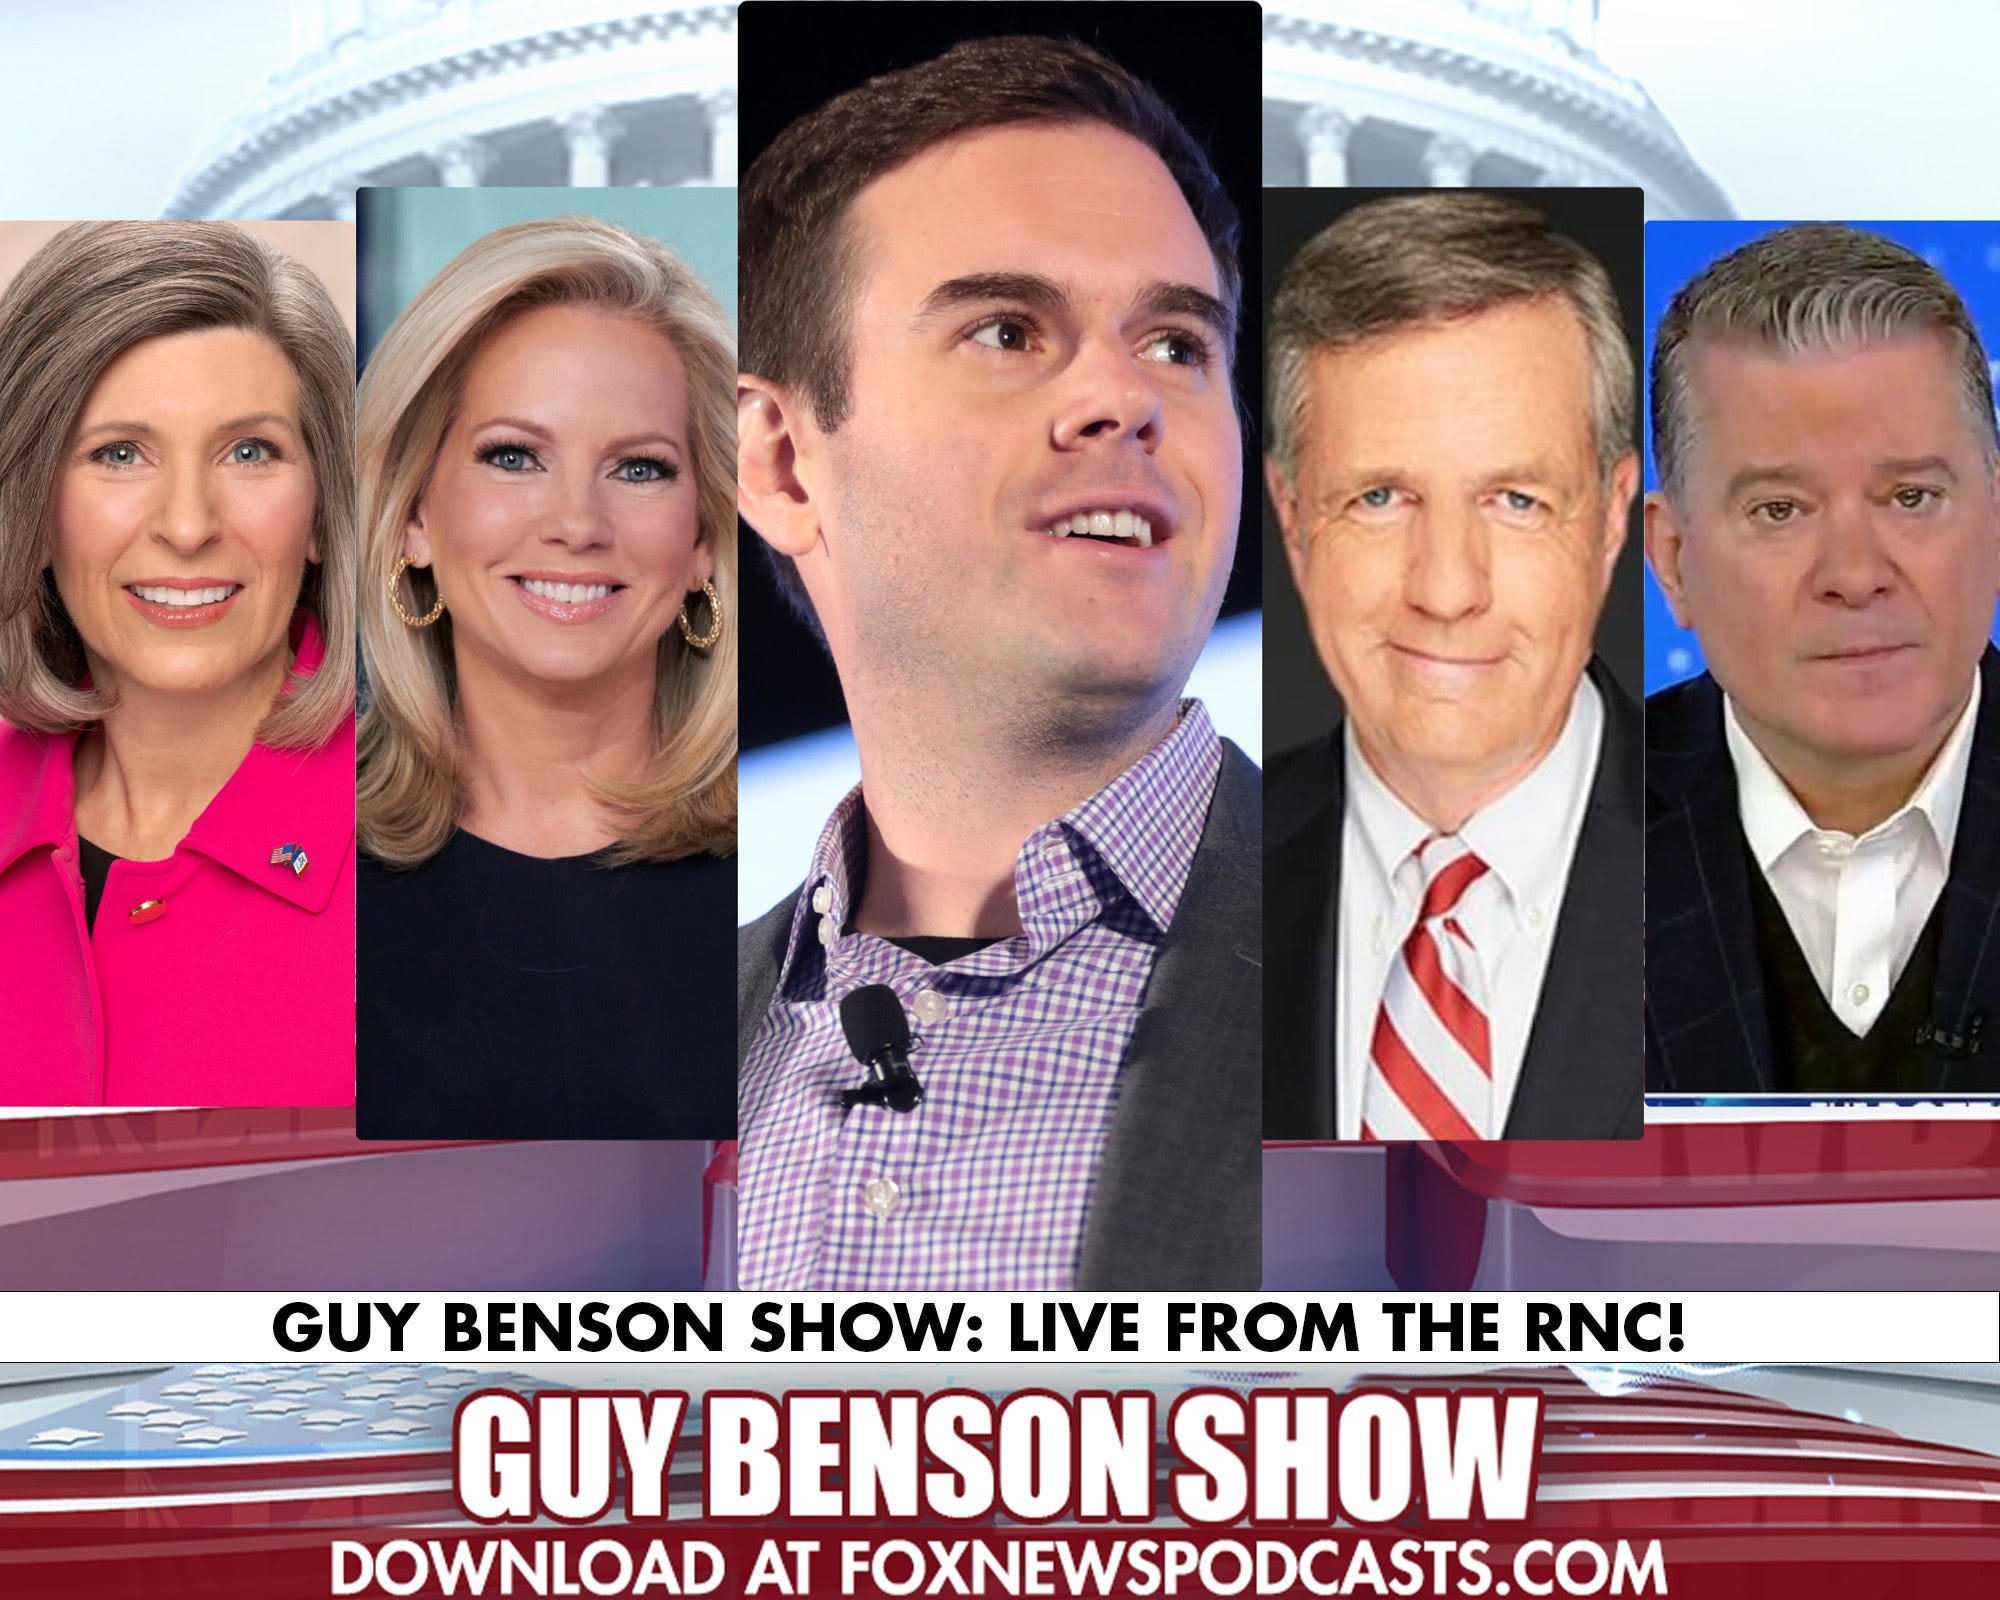 GUY BENSON SHOW: Live From the RNC Day 1 (featuring Brit Hume, Shannon Bream, Paul Mauro, Senator Joni Ernst, and Josh Kraushaar)